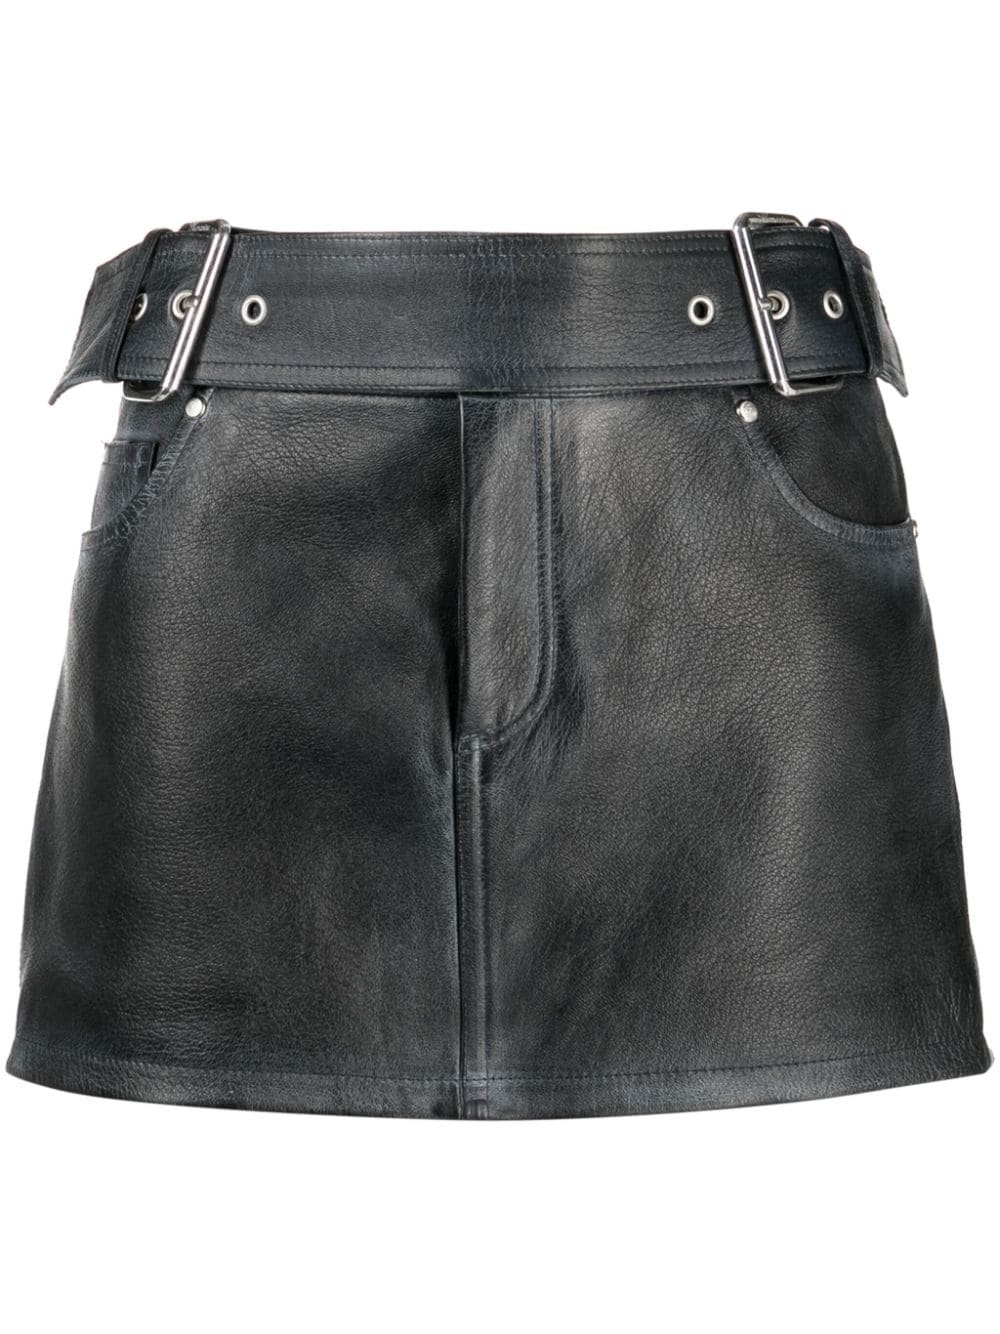 belted leather miniskirt - 1